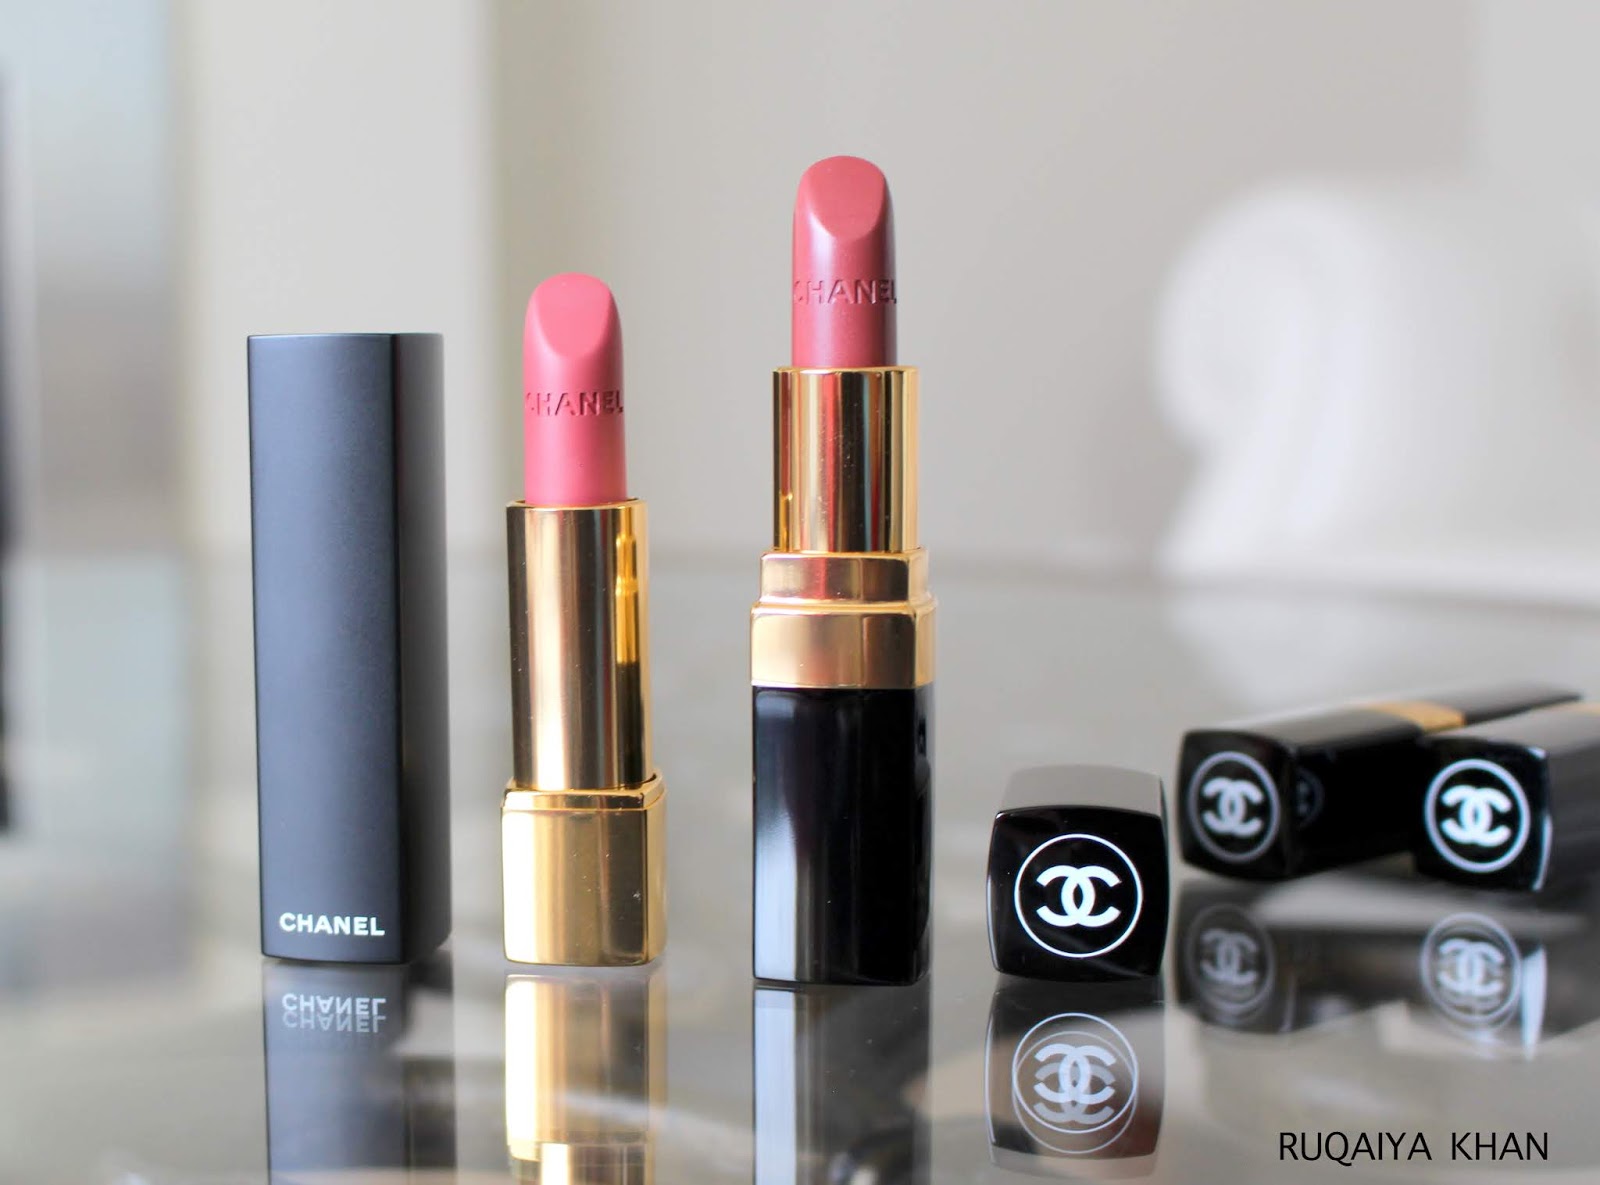 Ruqaiya Khan: CHANEL NUDE LIPSTICKS - Rouge Allure Velvet in 69 Abstrait & Rouge  Coco in Mademoiselle - Review with Swatches